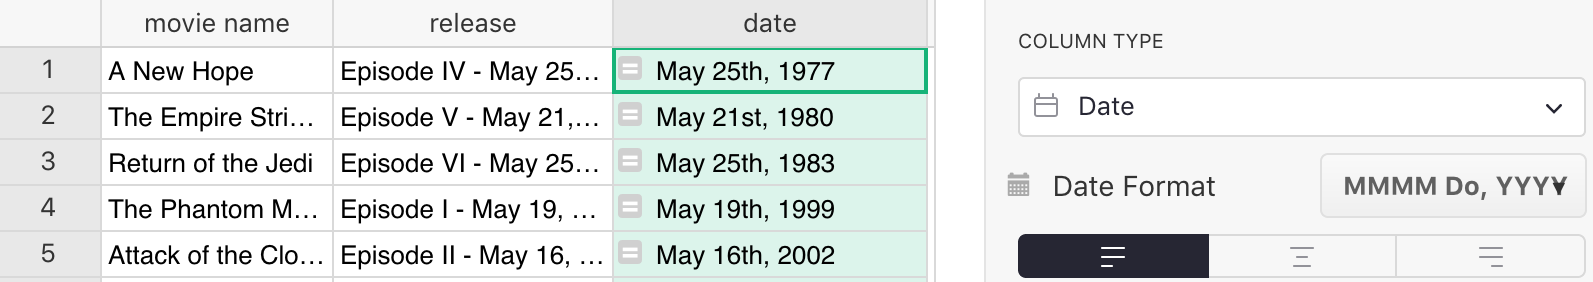 Formatted parsed date